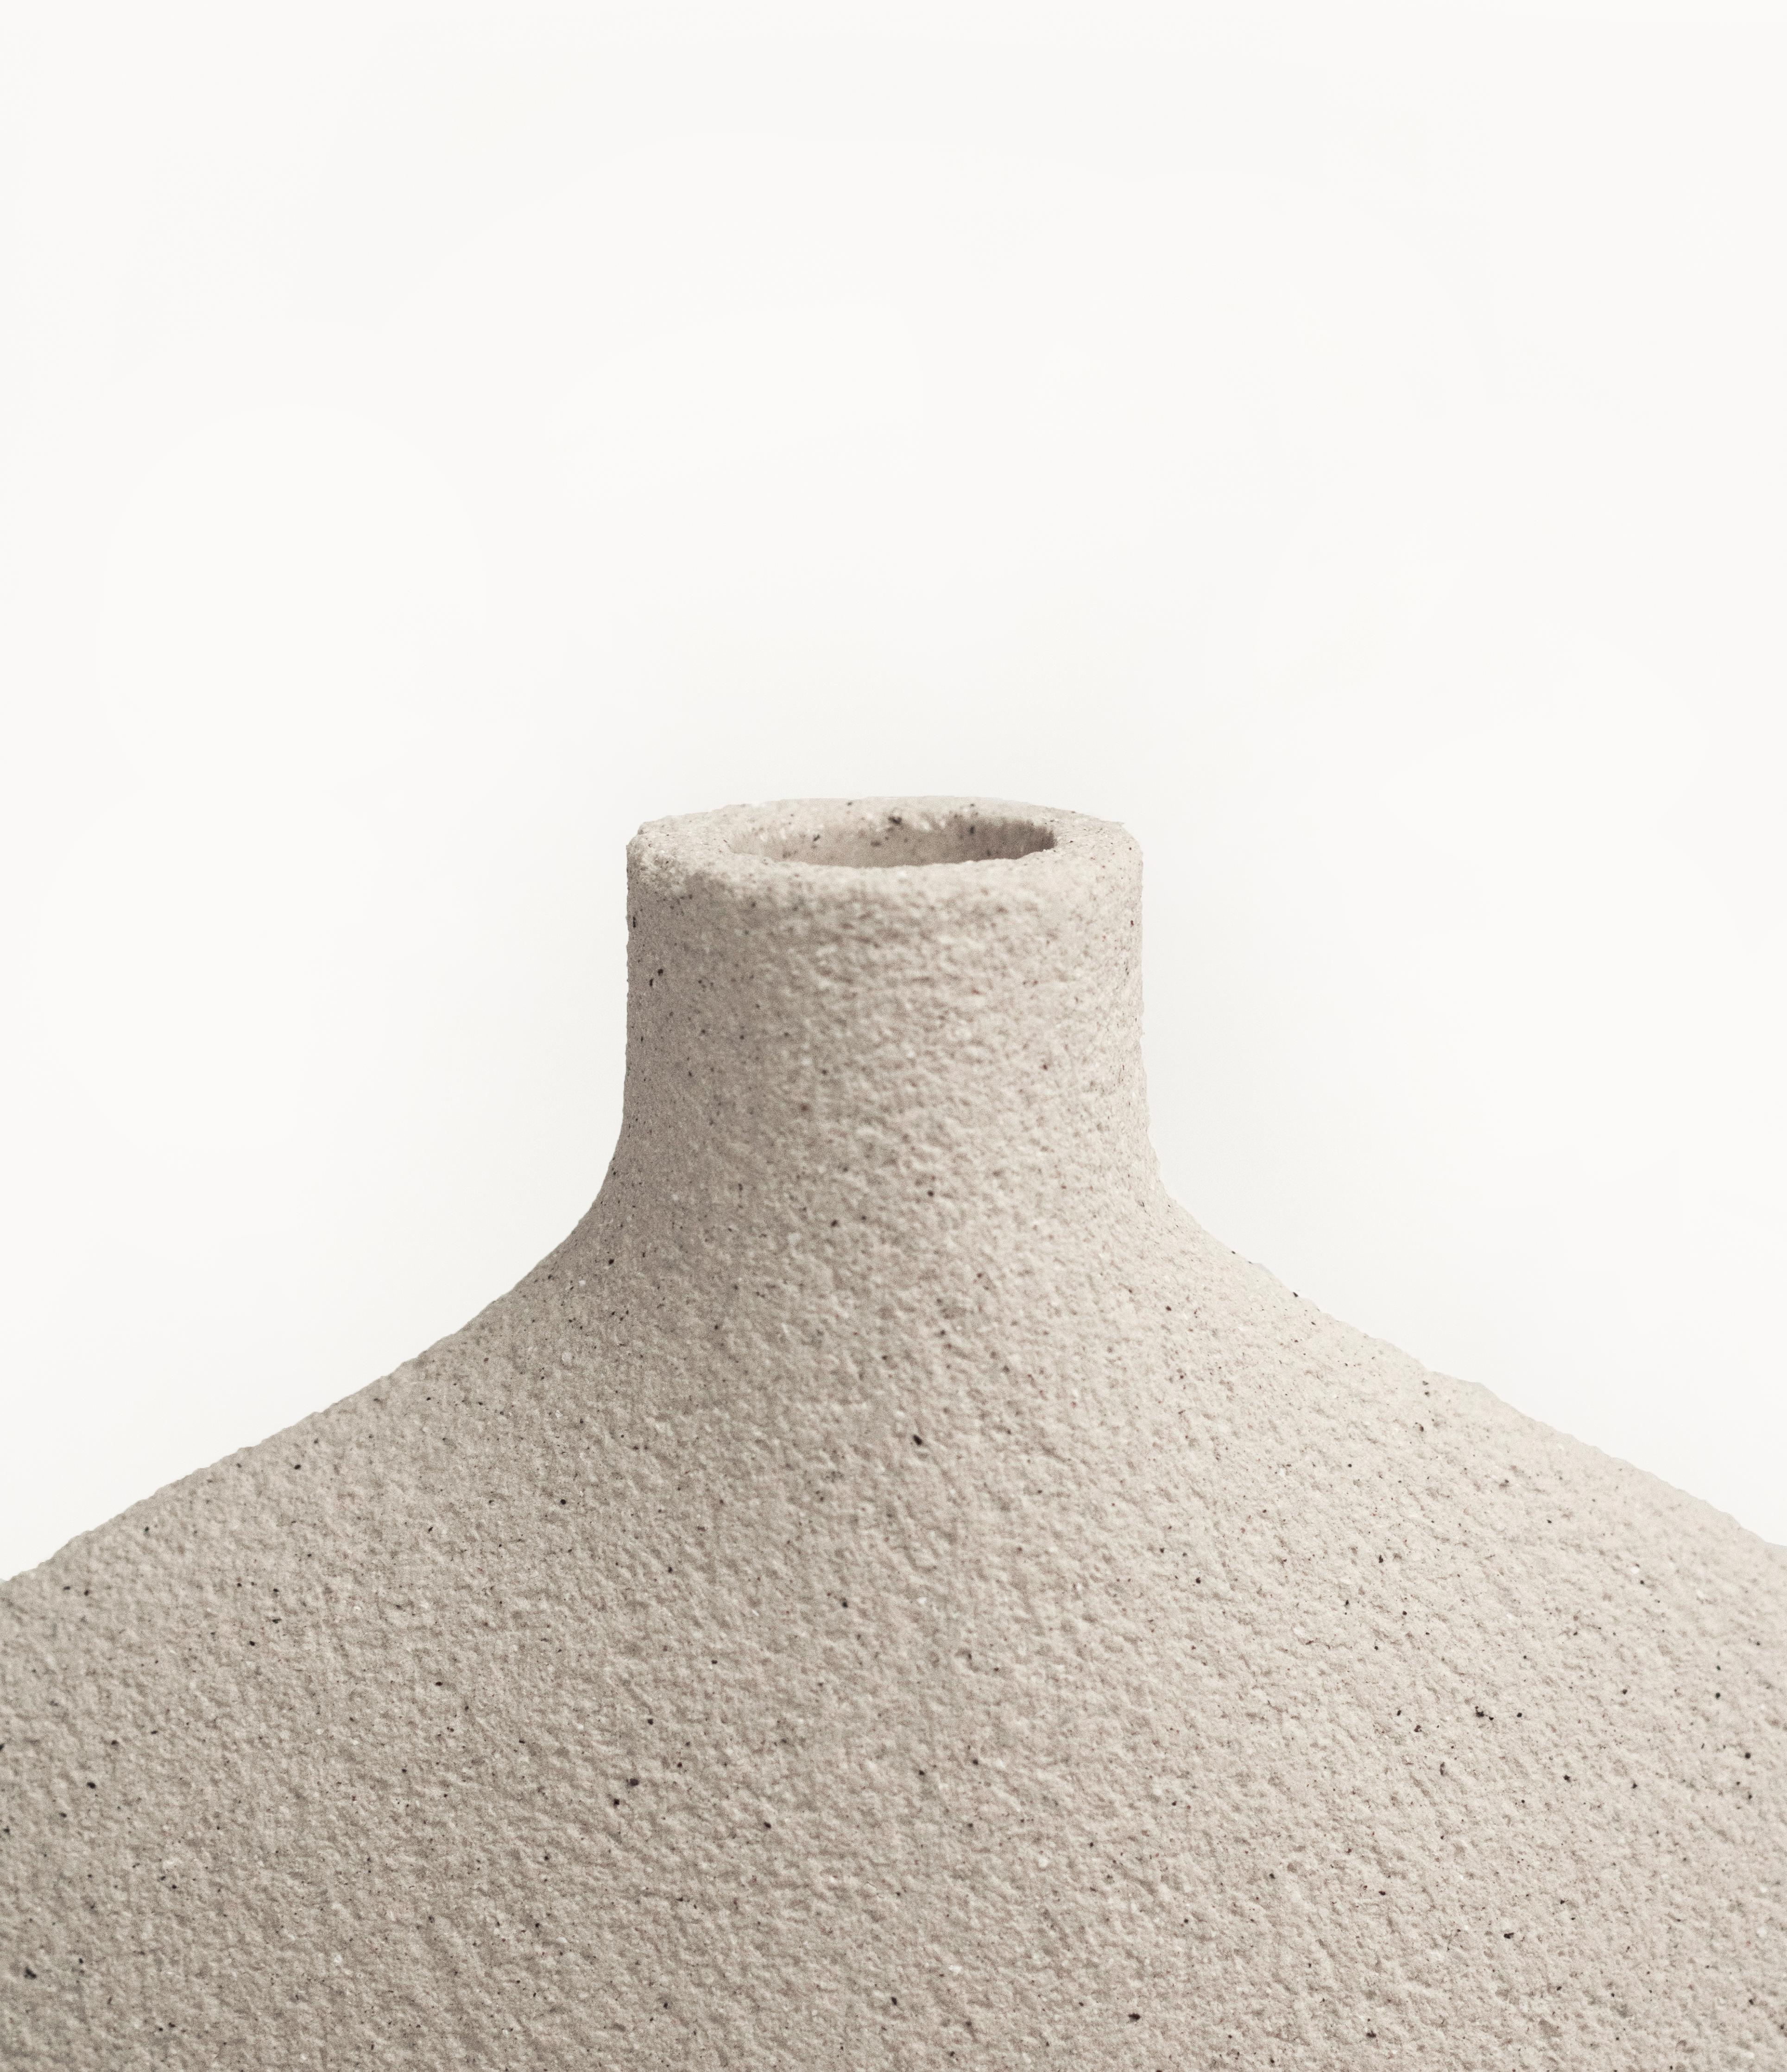 Minimalist 21st Century Goutte Vase in White Ceramic, Hand-Crafted in France